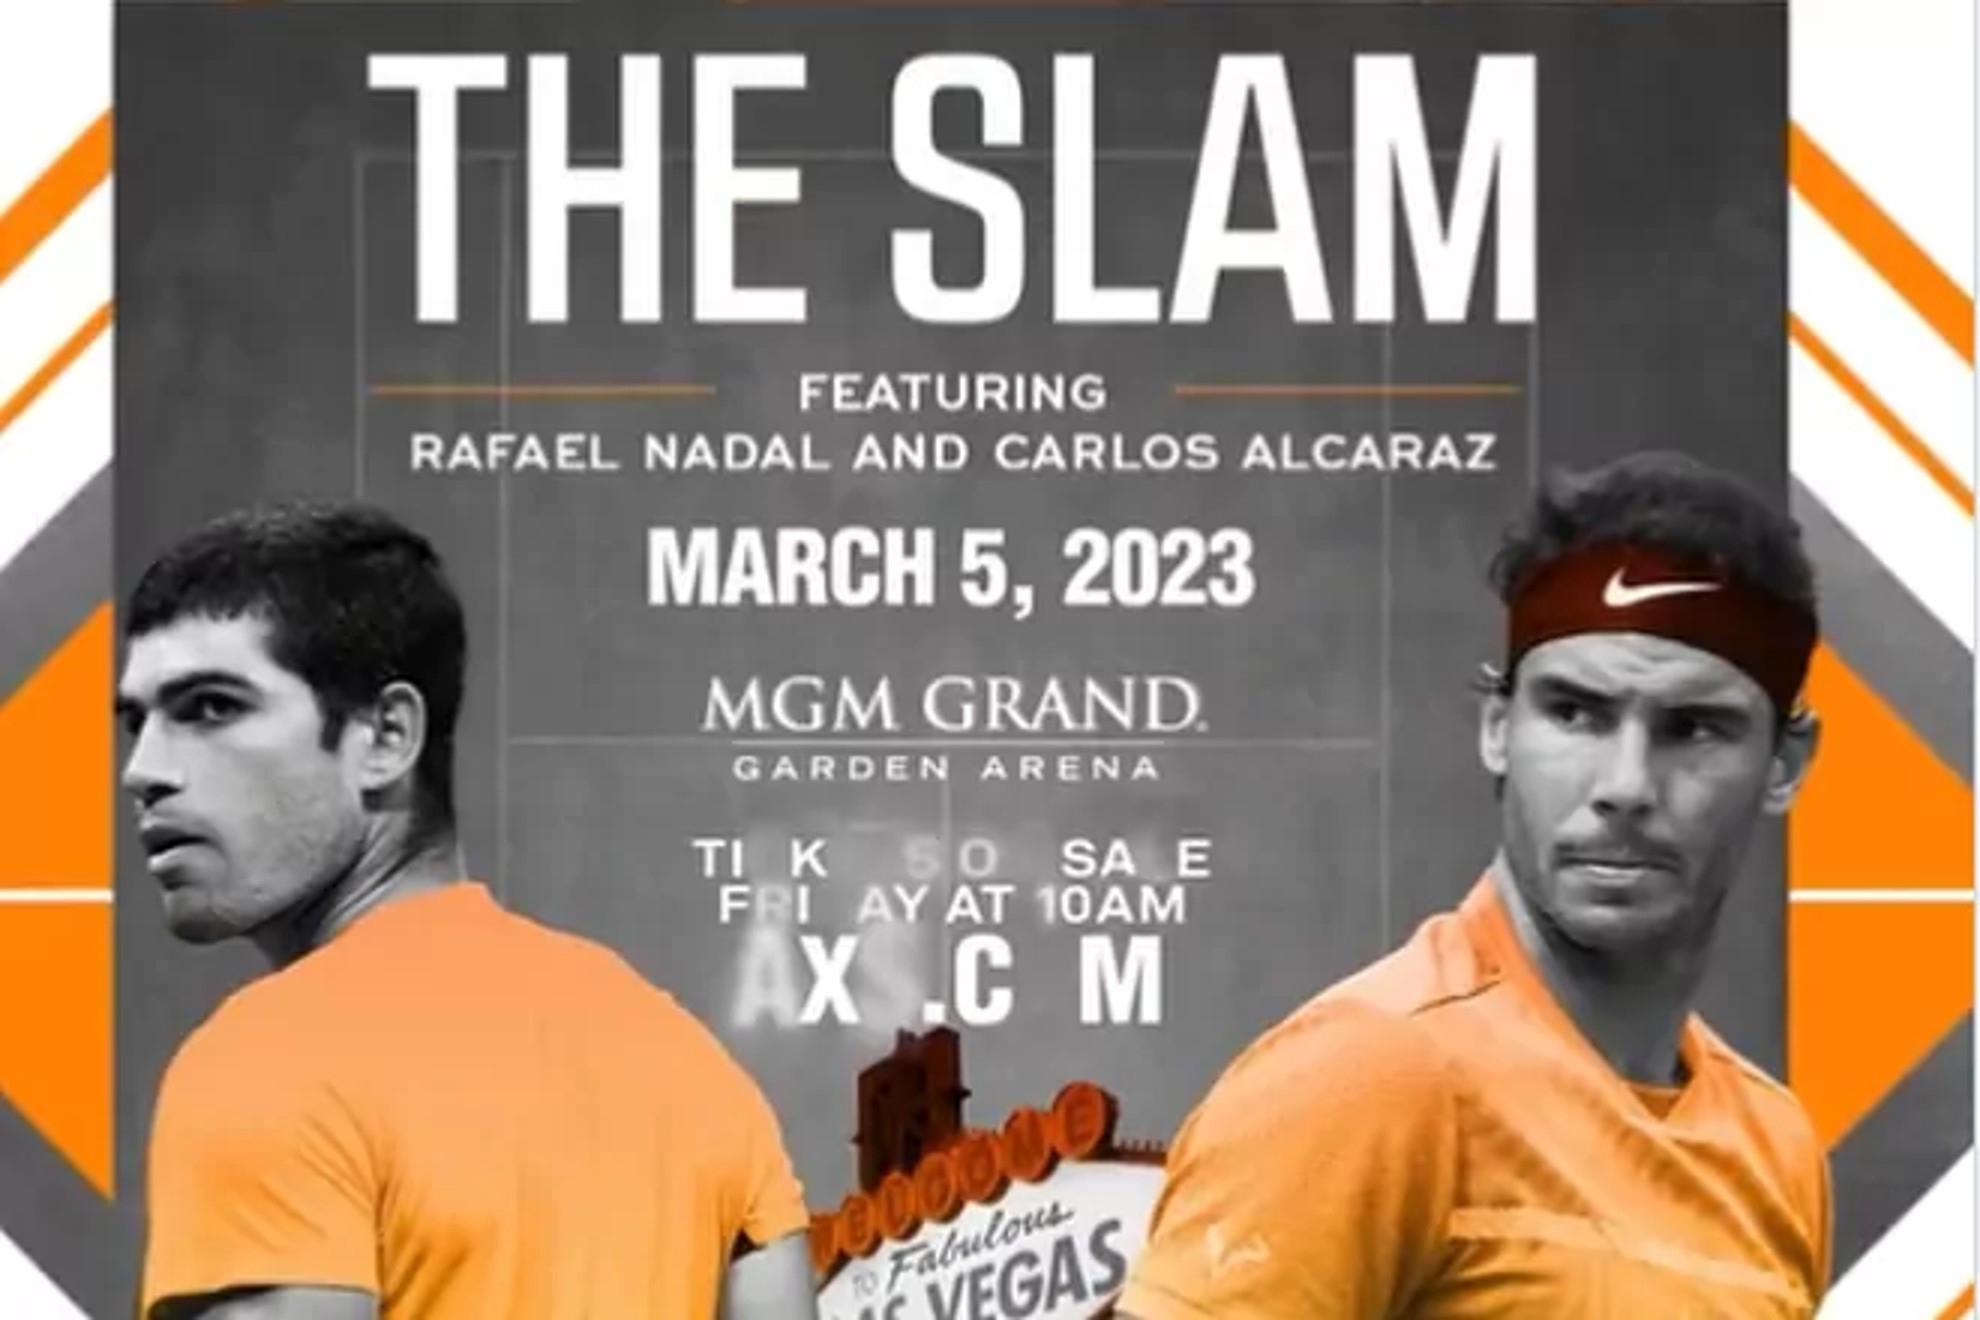 Rafa Nadal and Carlos Alcaraz to face each other on March 5 in Las Vegas